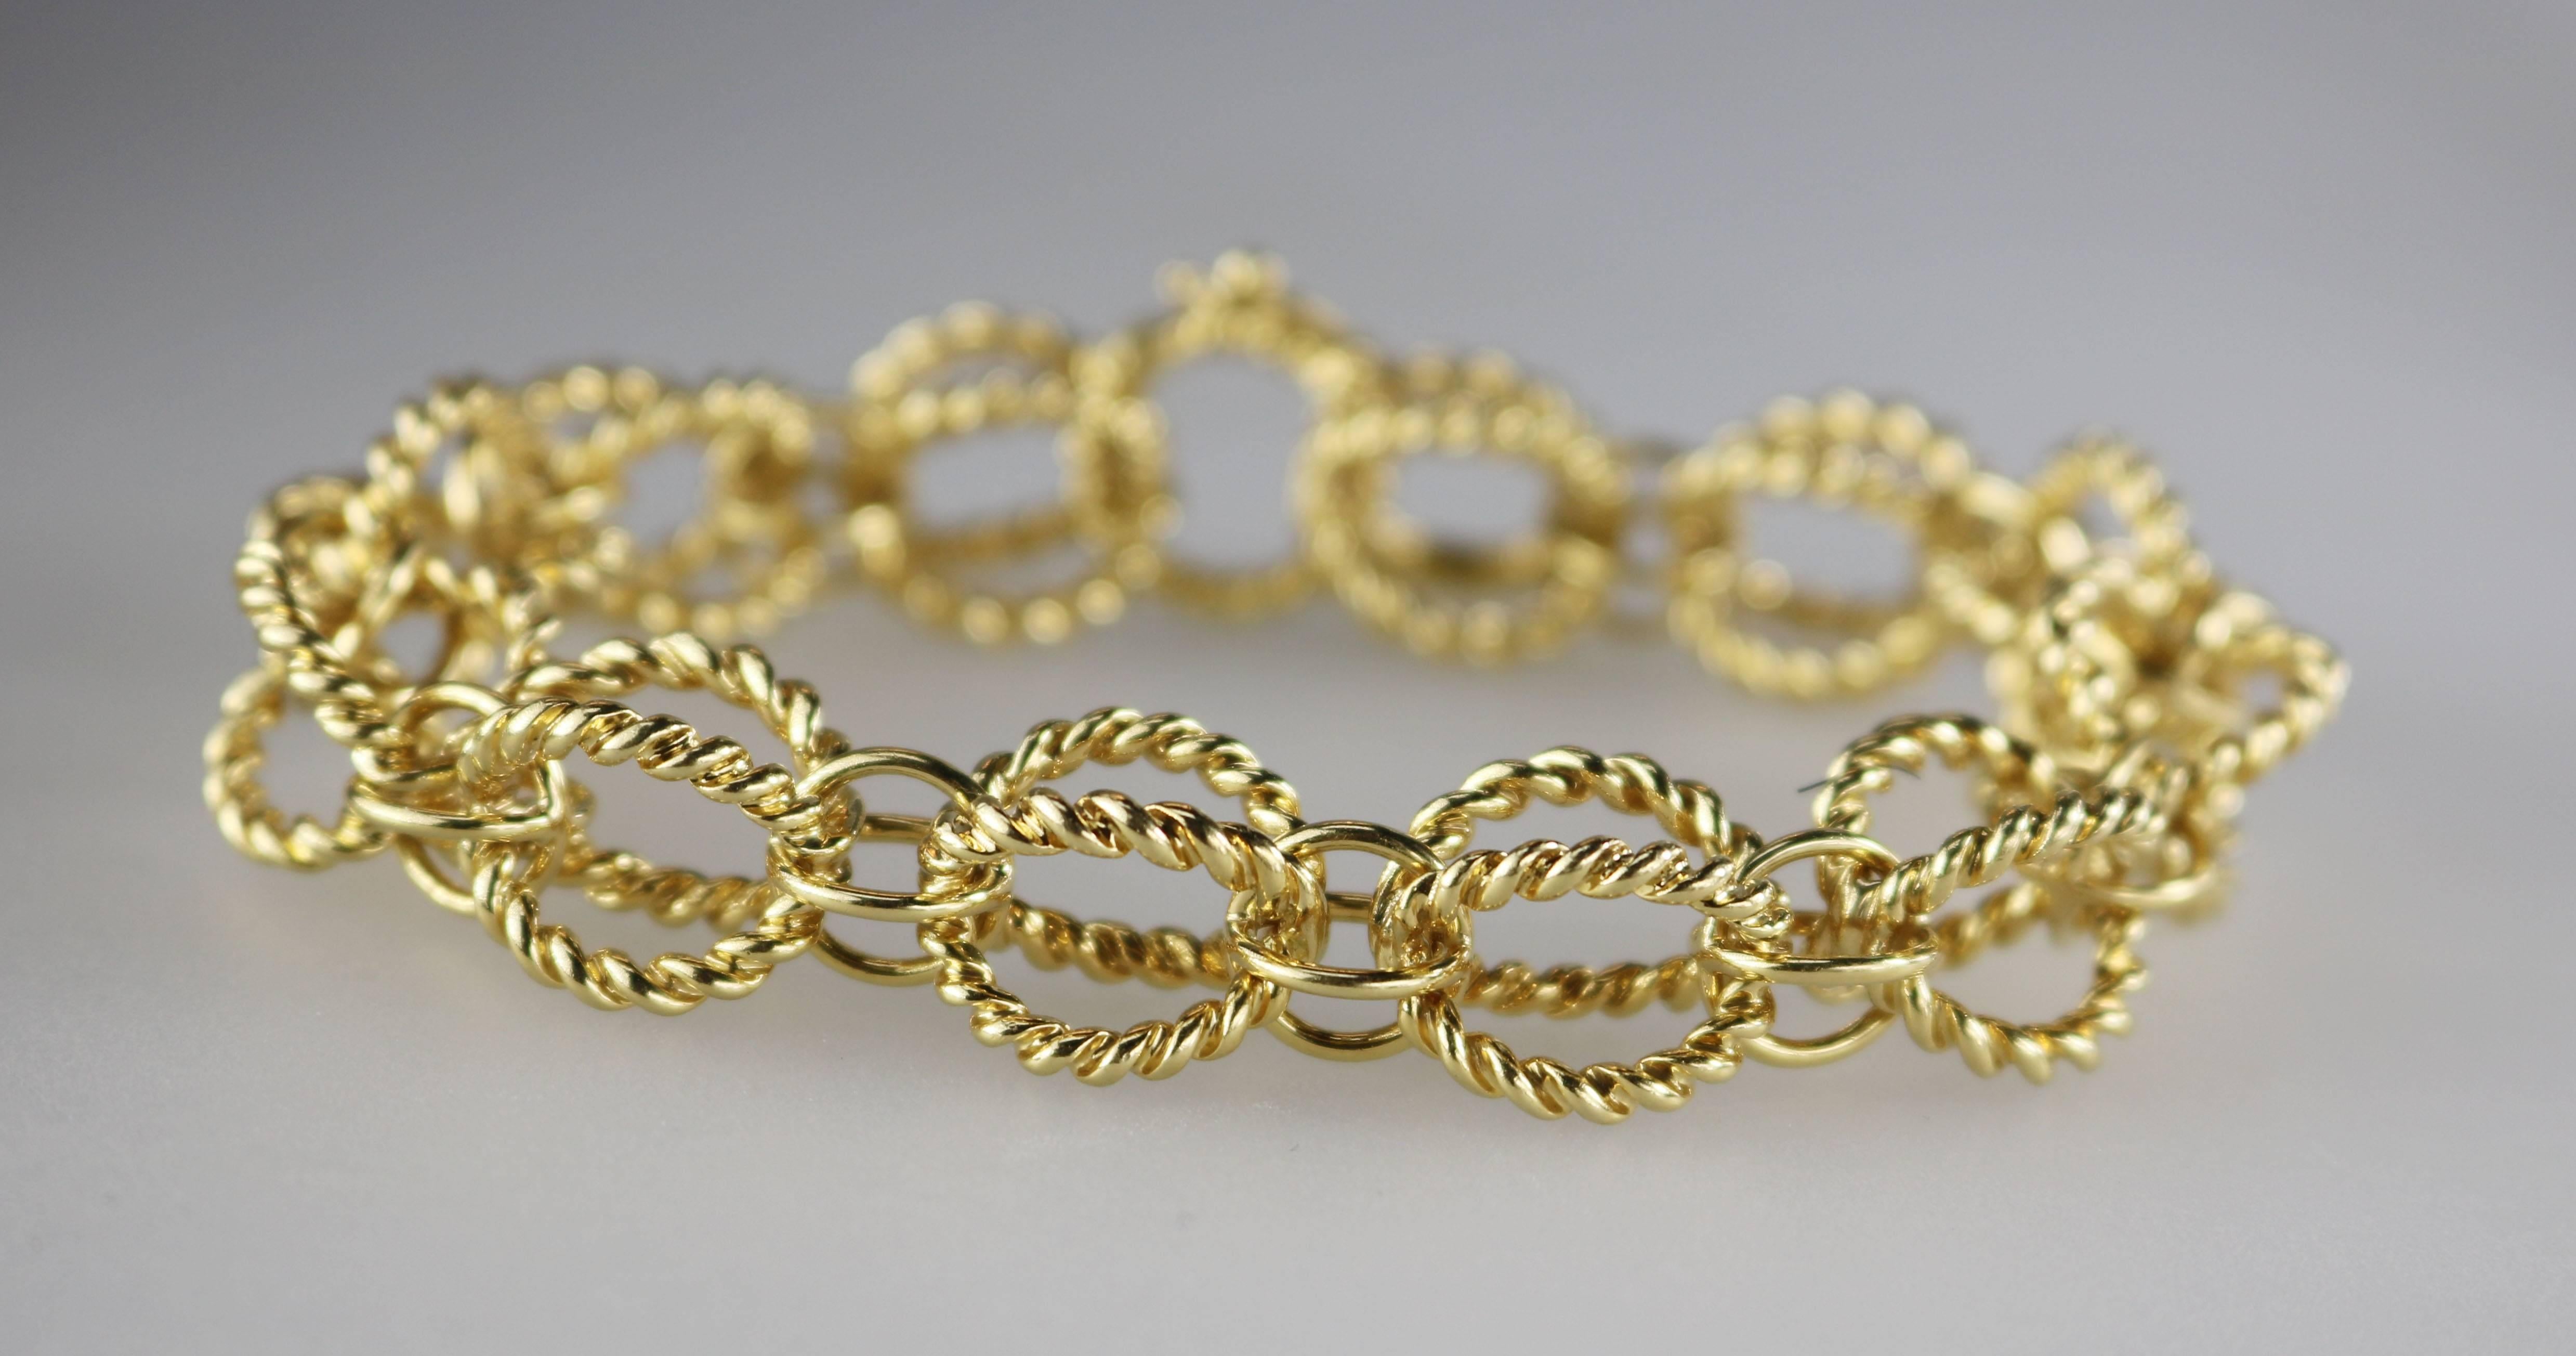 Tiffany & Co. Schlumberger circle rope bracelet in 18k gold. 
Current retail is $8,200  Signed Tiffany & Co. Schlumberger
Length 7.75 inches